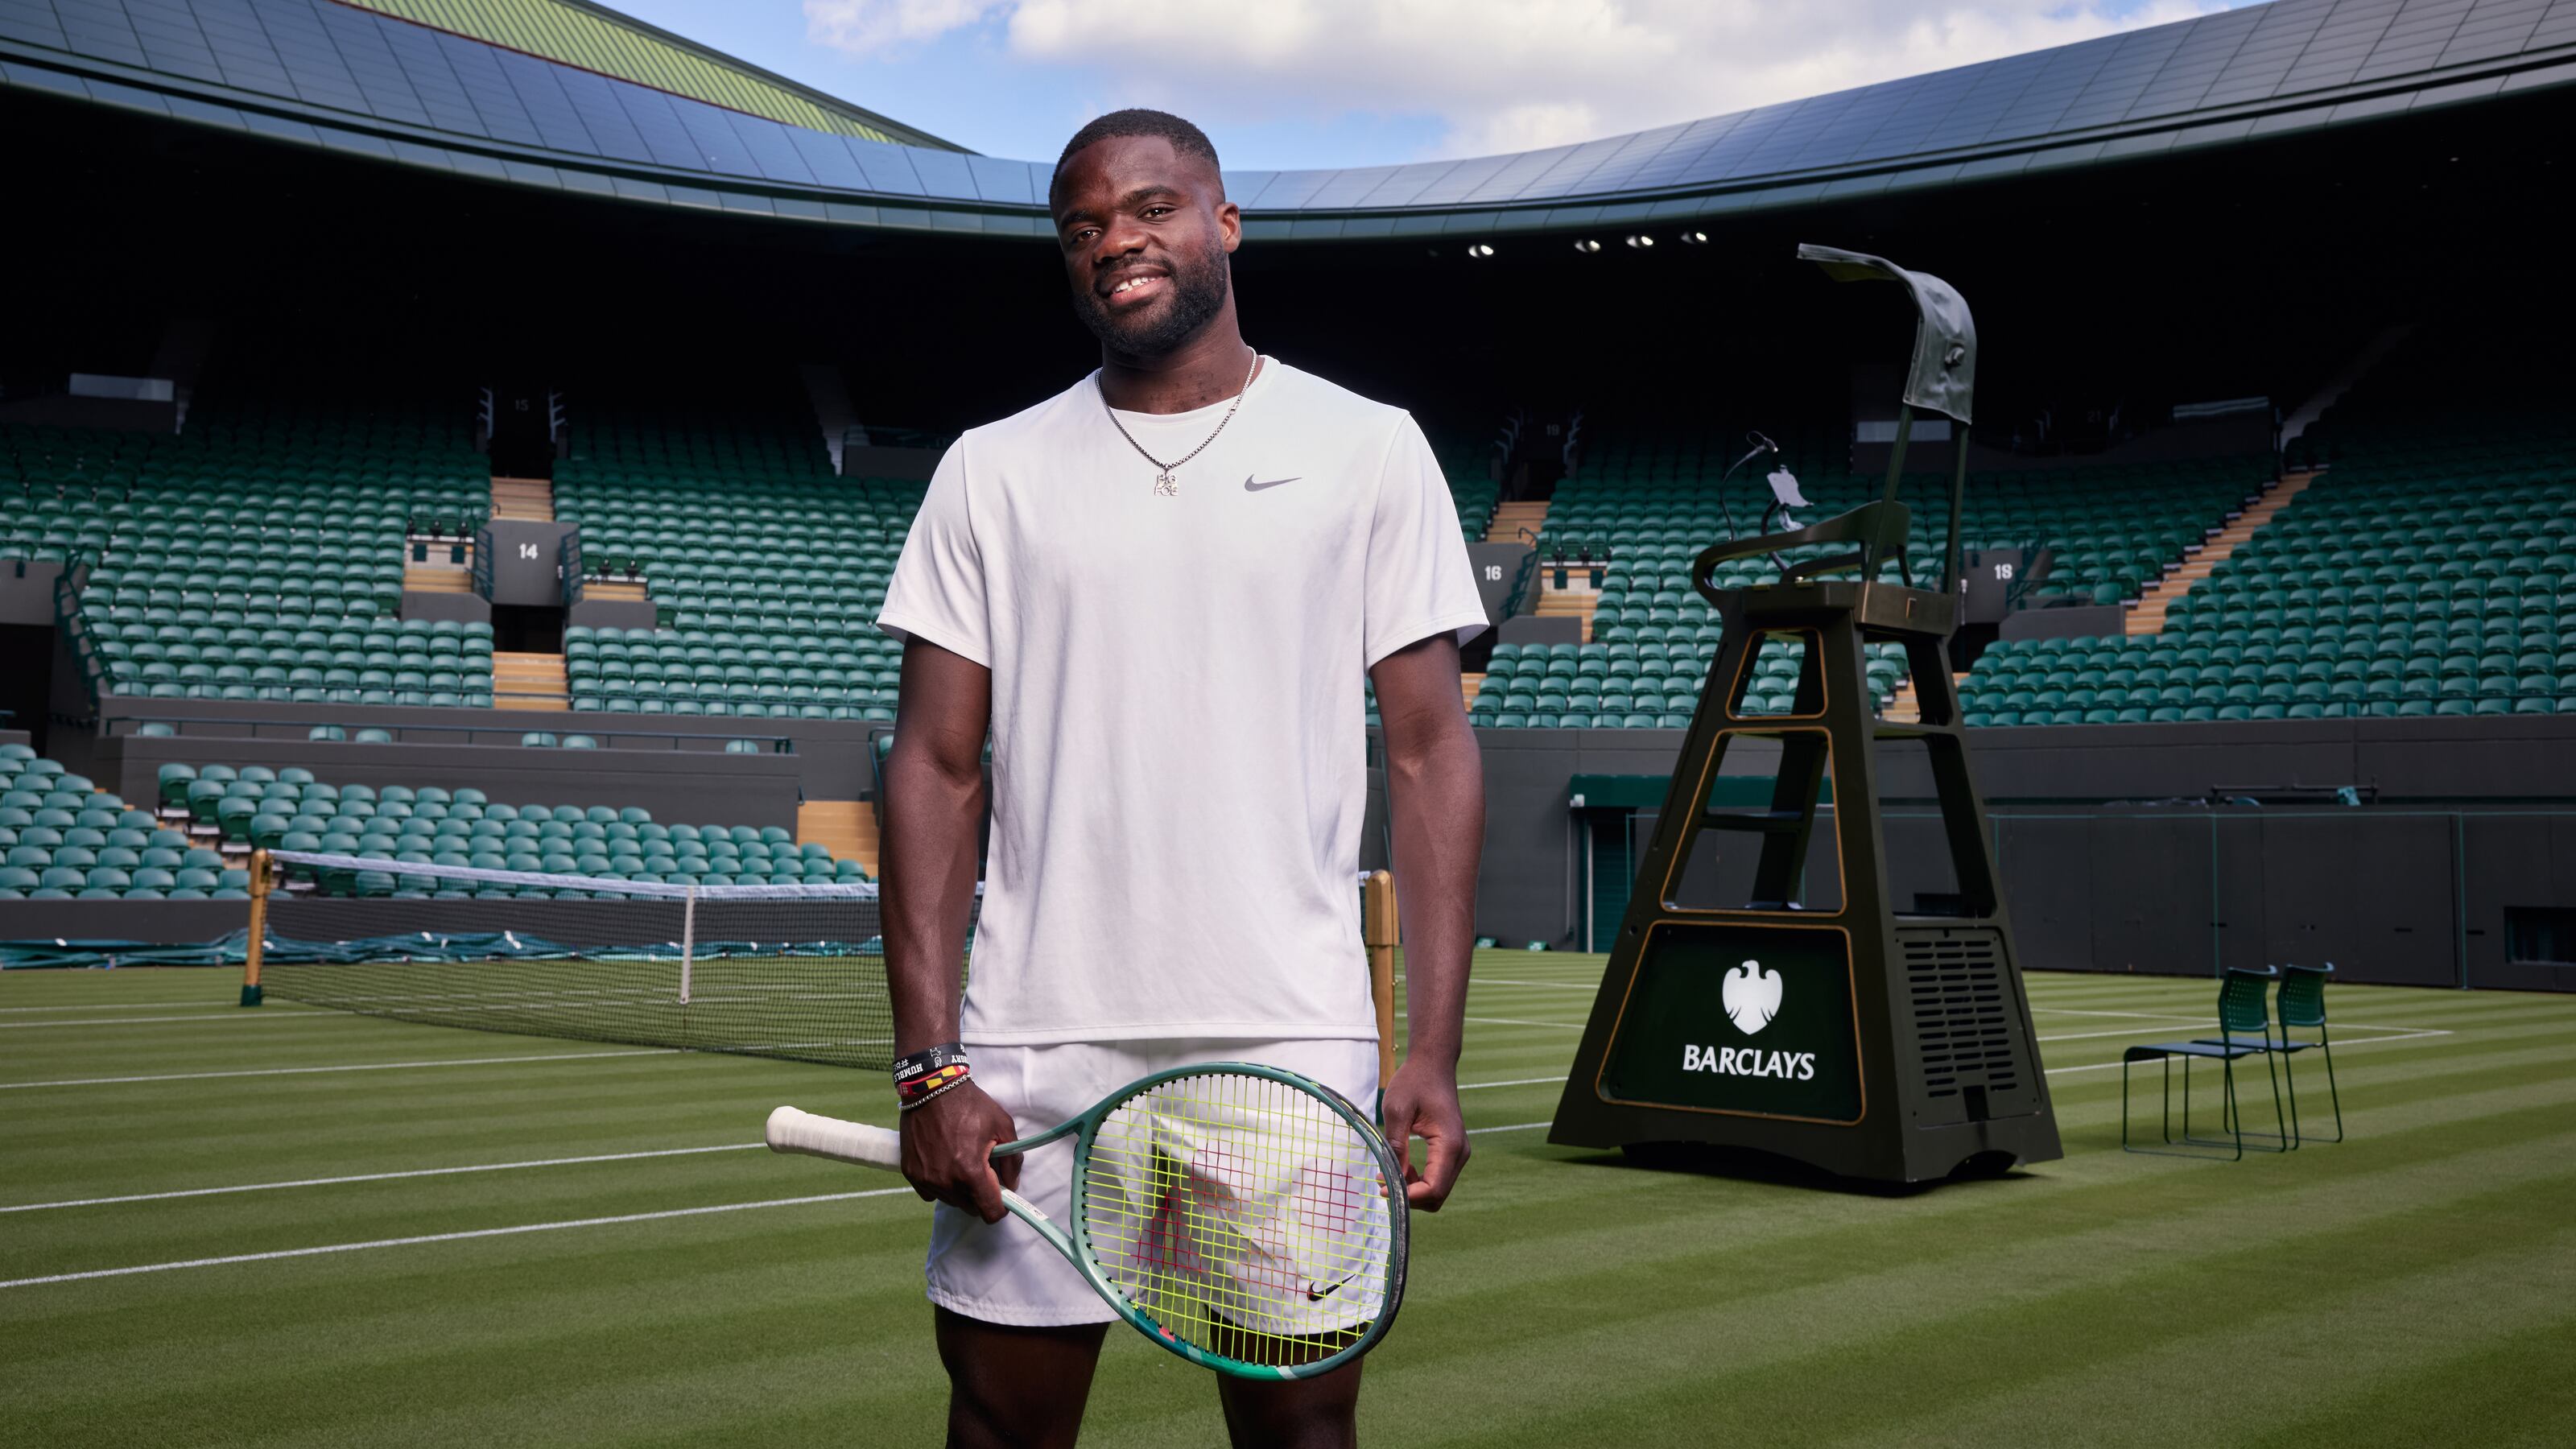 Frances Tiafoe entered the world Top 10 last year